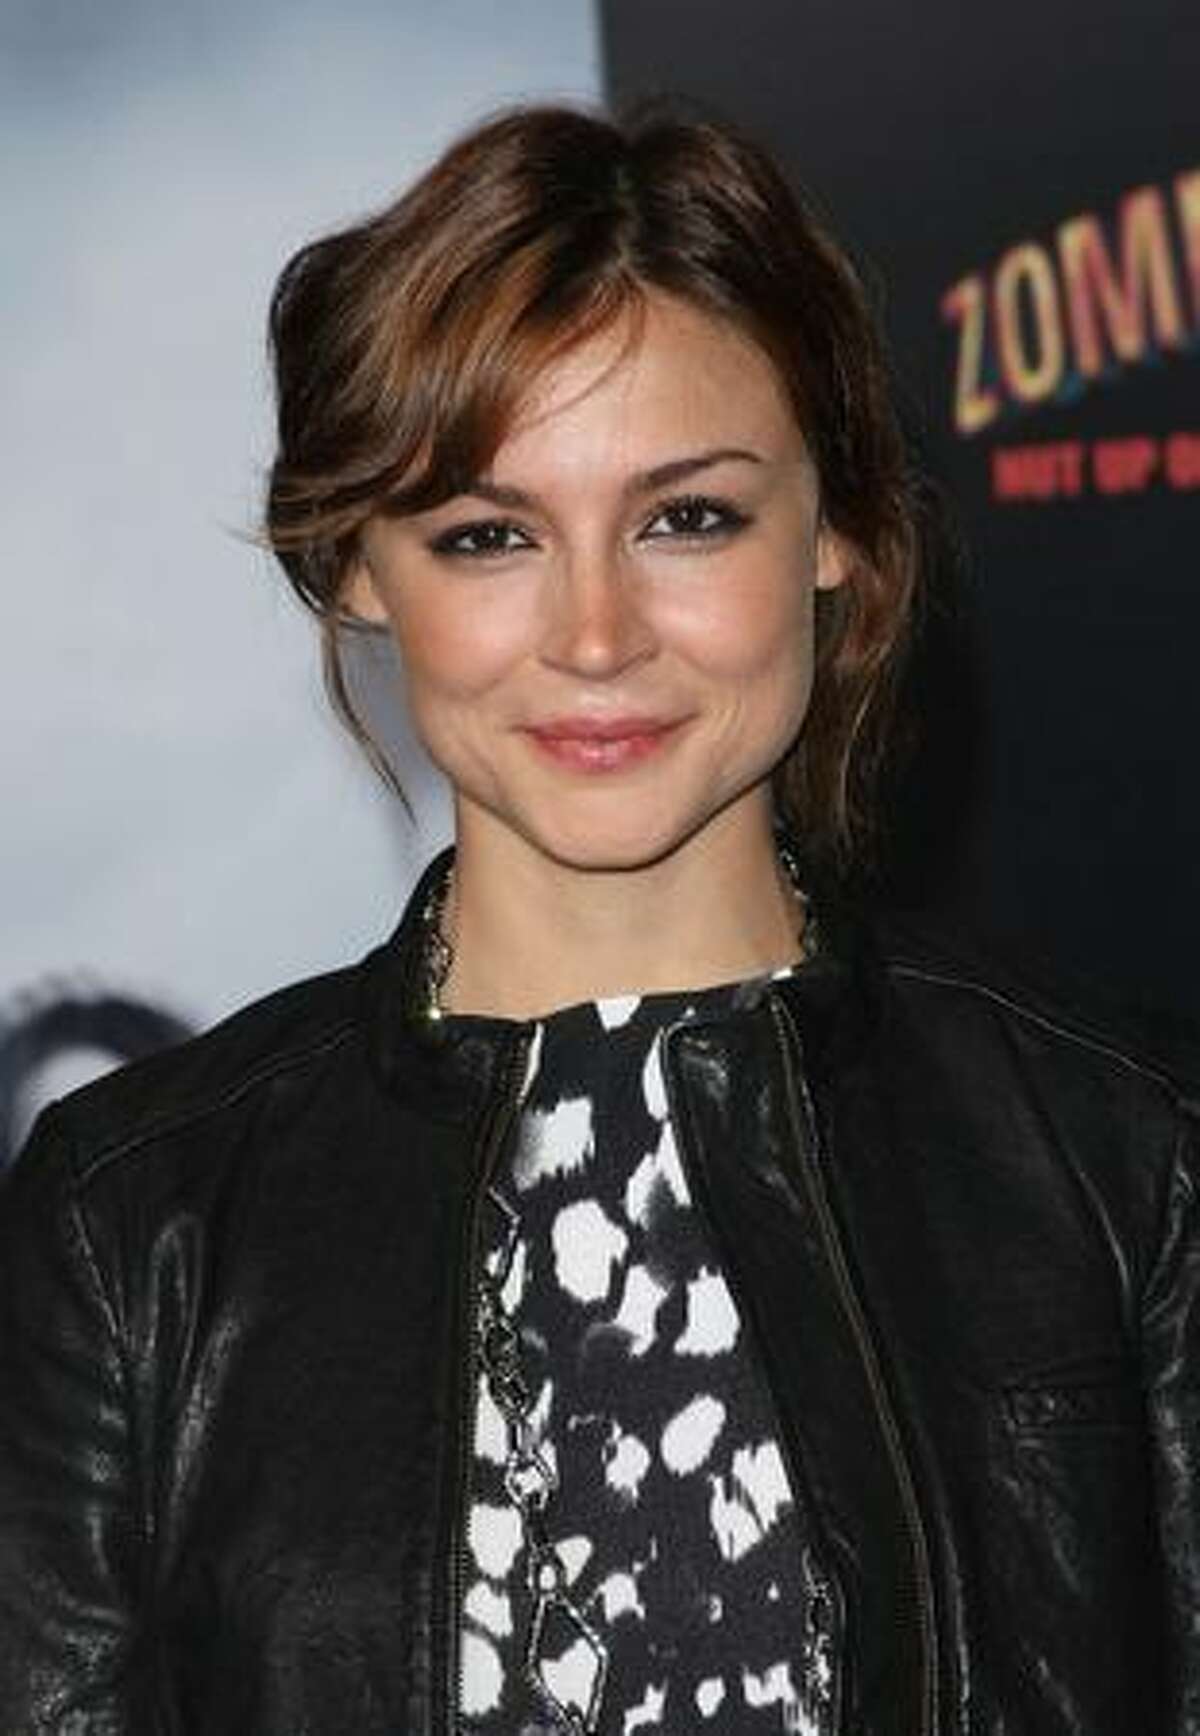 Actress Samaire Armstrong arrives at the Los Angeles premiere of Sony Pictures' "Zombieland" in Los Angeles, California.